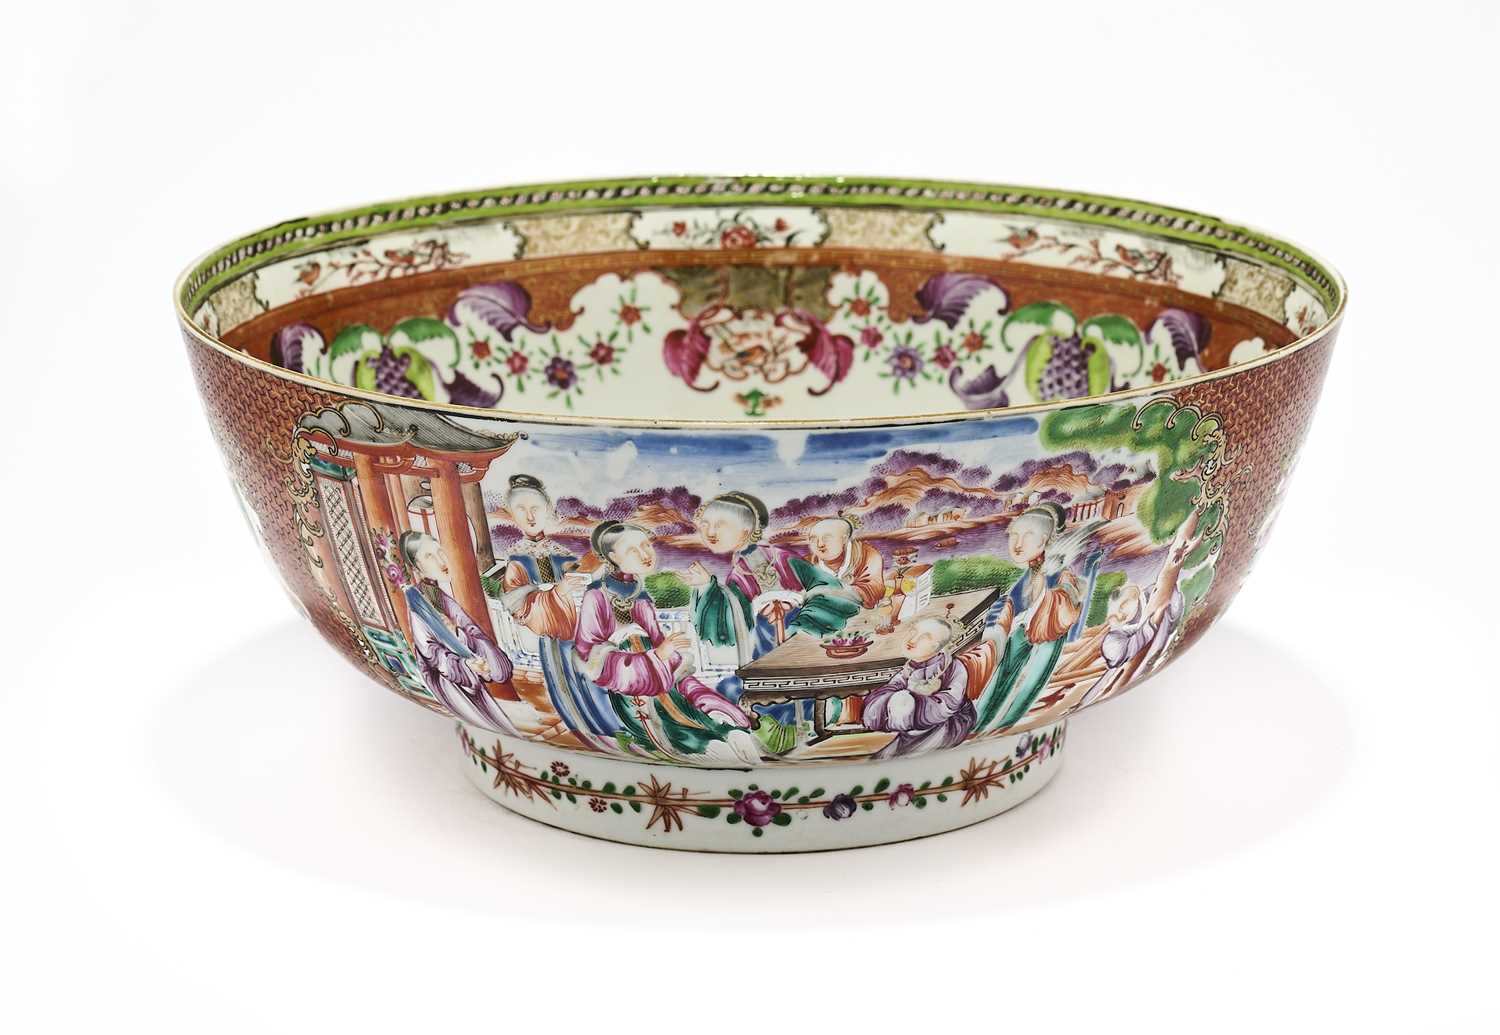 Lot 61 - A CHINESE FAMILLE-ROSE PUNCHBOWL, QING DYNASTY, 18TH CENTURY